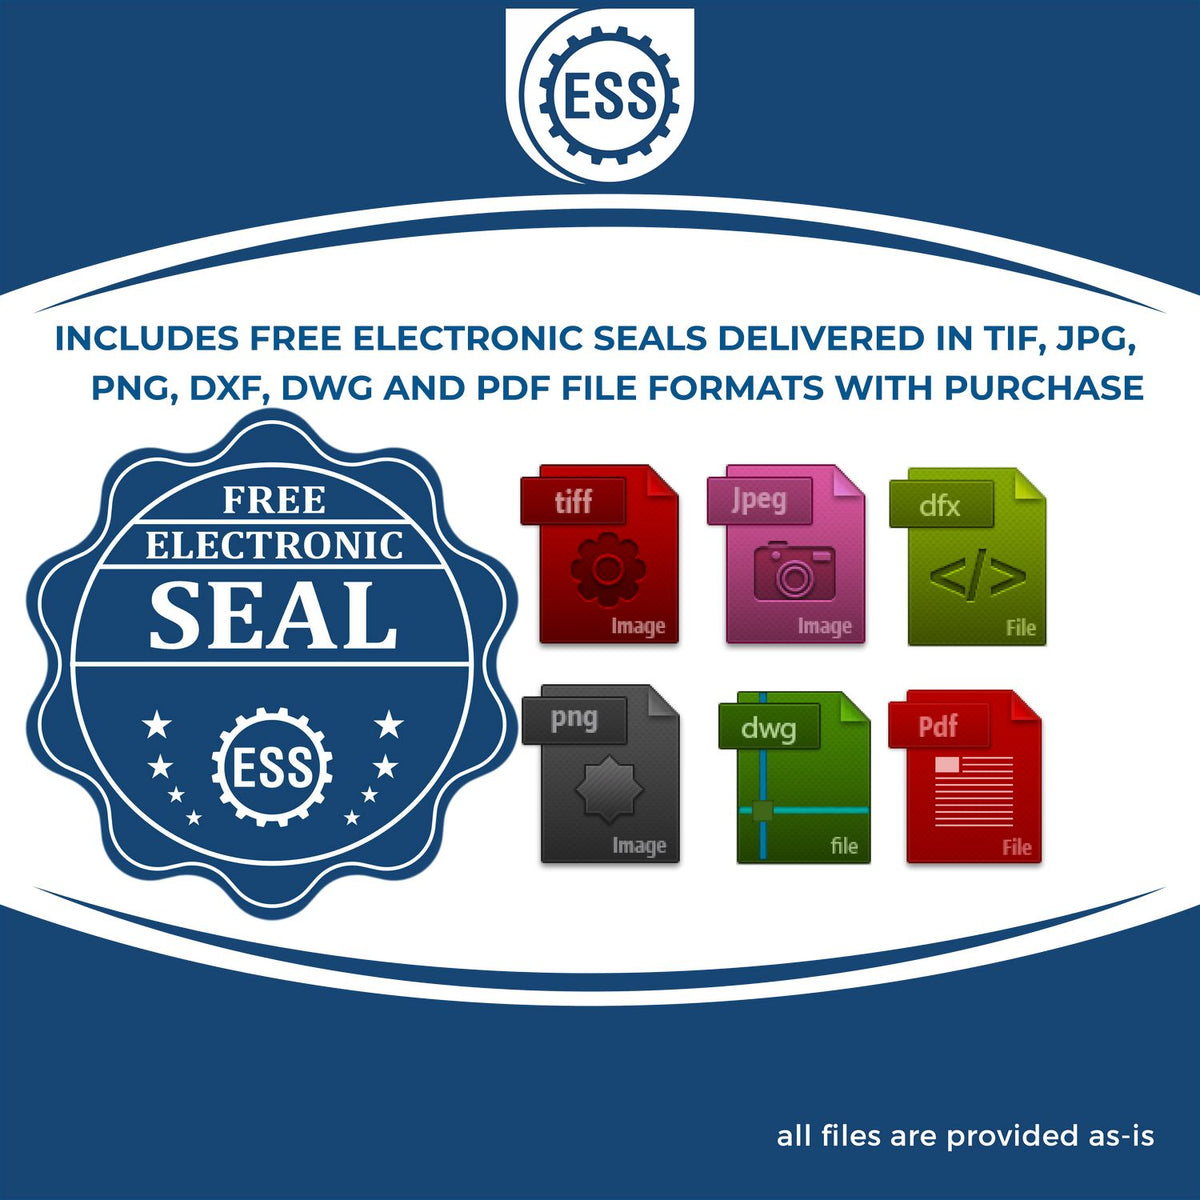 An infographic for the free electronic seal for the Gift Oklahoma Land Surveyor Seal illustrating the different file type icons such as DXF, DWG, TIF, JPG and PNG.